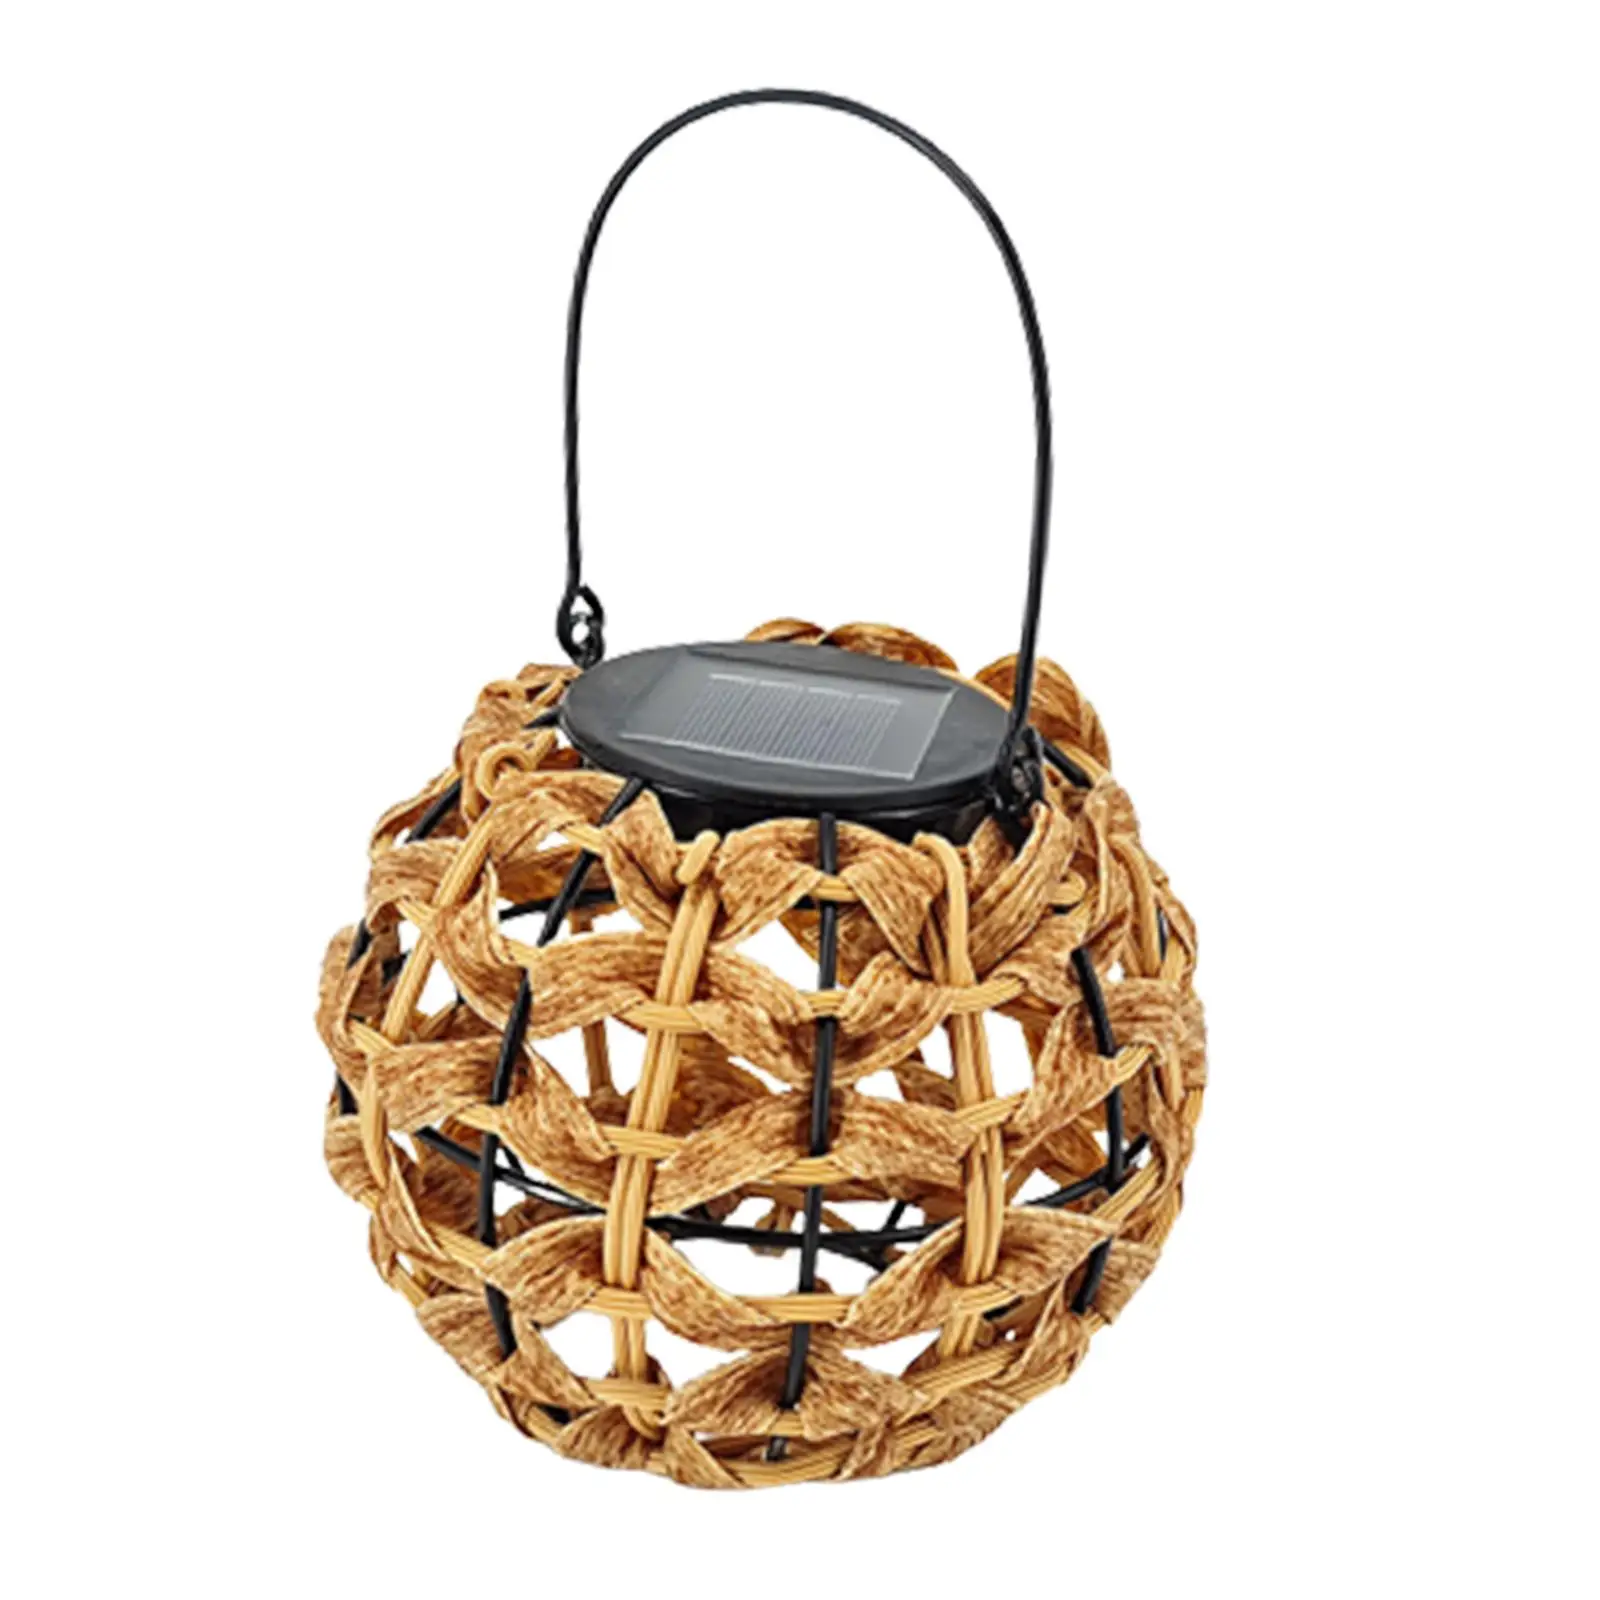 Solar Power Lights Rustic with Handle Outdoor Solar Lanterns Hanging Lantern Lamps for Courtyard Home Decoration Porch Balcony